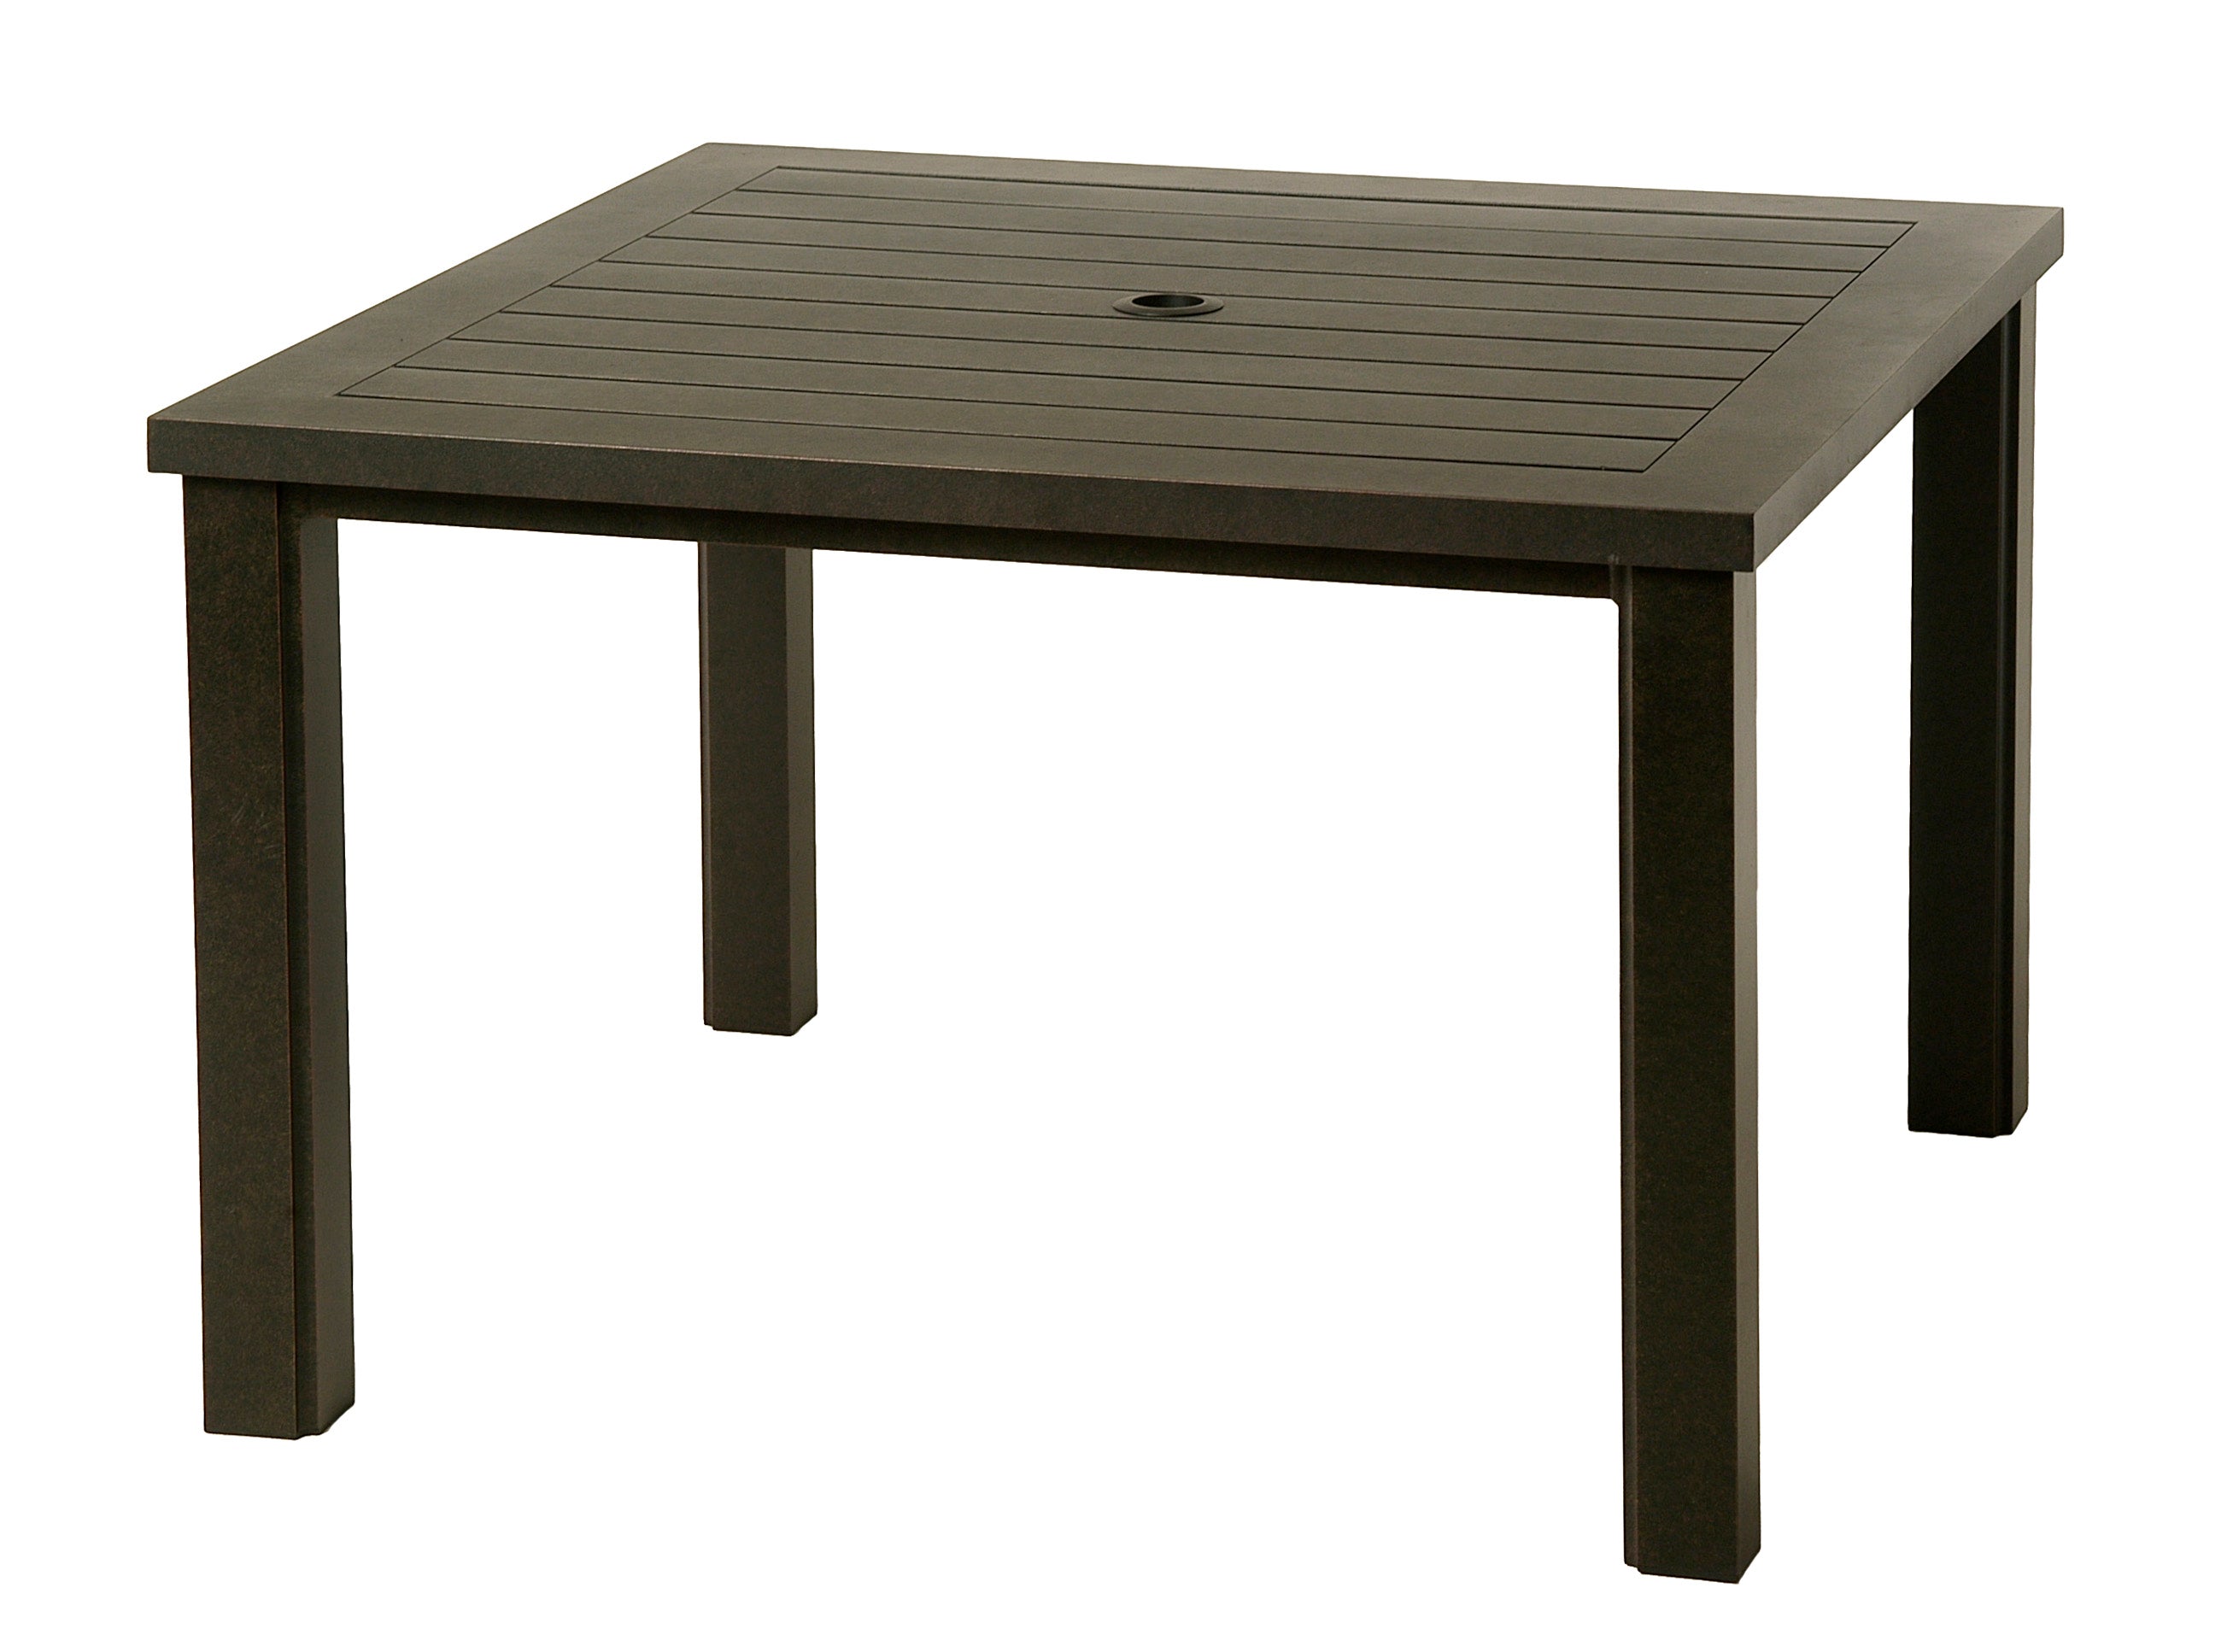 Sherwood 44" Square Table by Hanamint